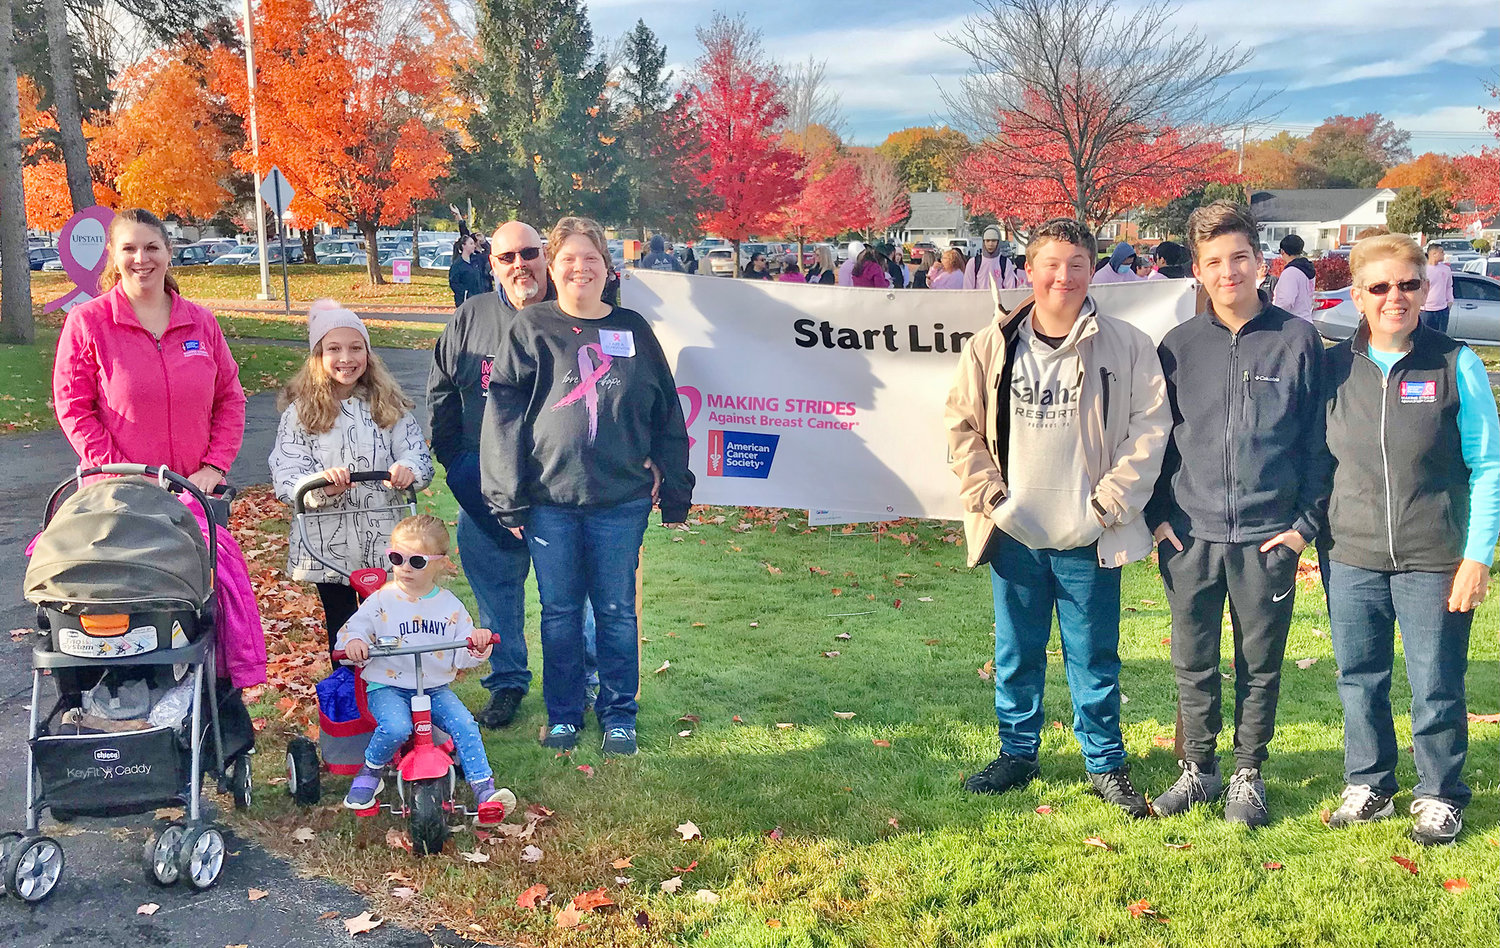 Supporting Katie Waltermire, center left, Sunday at the starting line of the American Cancer Society’s Making Strides Against Breast Cancer walk in Utica are, from left, her sister Joanna Marshall with son Jaxson in the stroller, her daughter McKenzie and niece Brianna on the bike, her boyfriend John Monette, sons Ethan and Tim and mom, Janet Stevens.